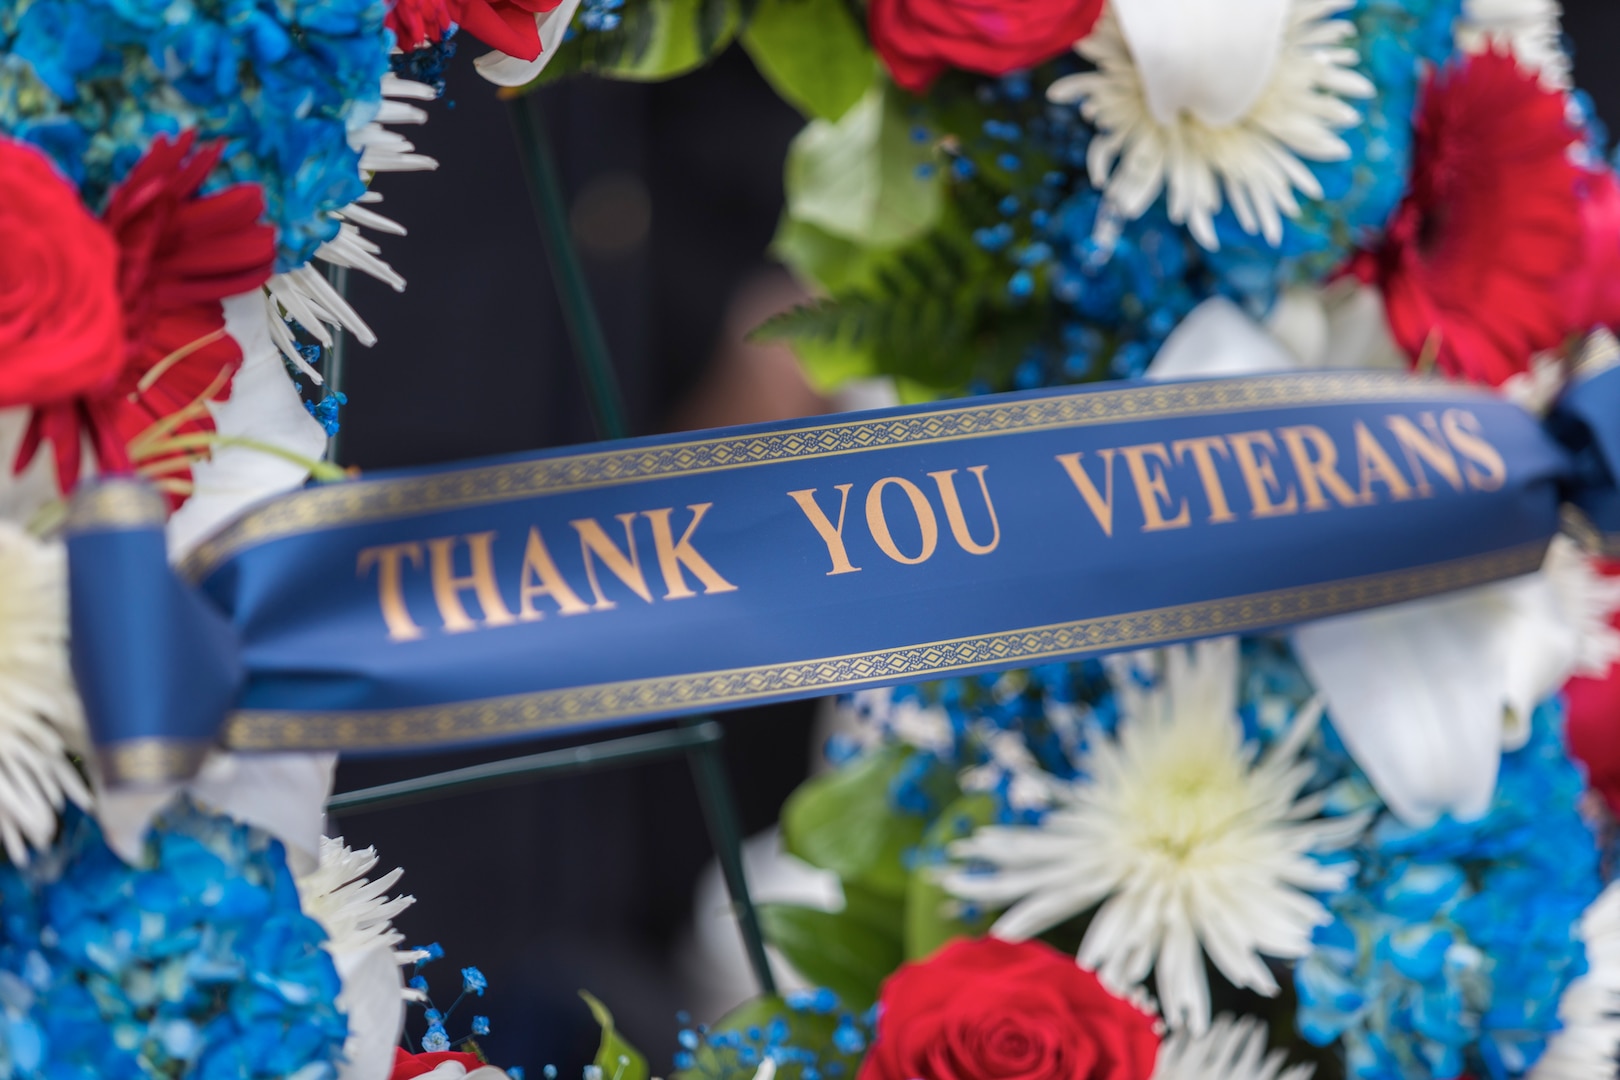 Military personnel and members from the community attended a wreath presentation ceremony at The Alamo in San Antonio Nov. 10. The ceremony was part of the Veterans Day parade held to honor veterans and current active duty Soldiers, Airmen, Sailors, Coast Guardsmen and Marines.